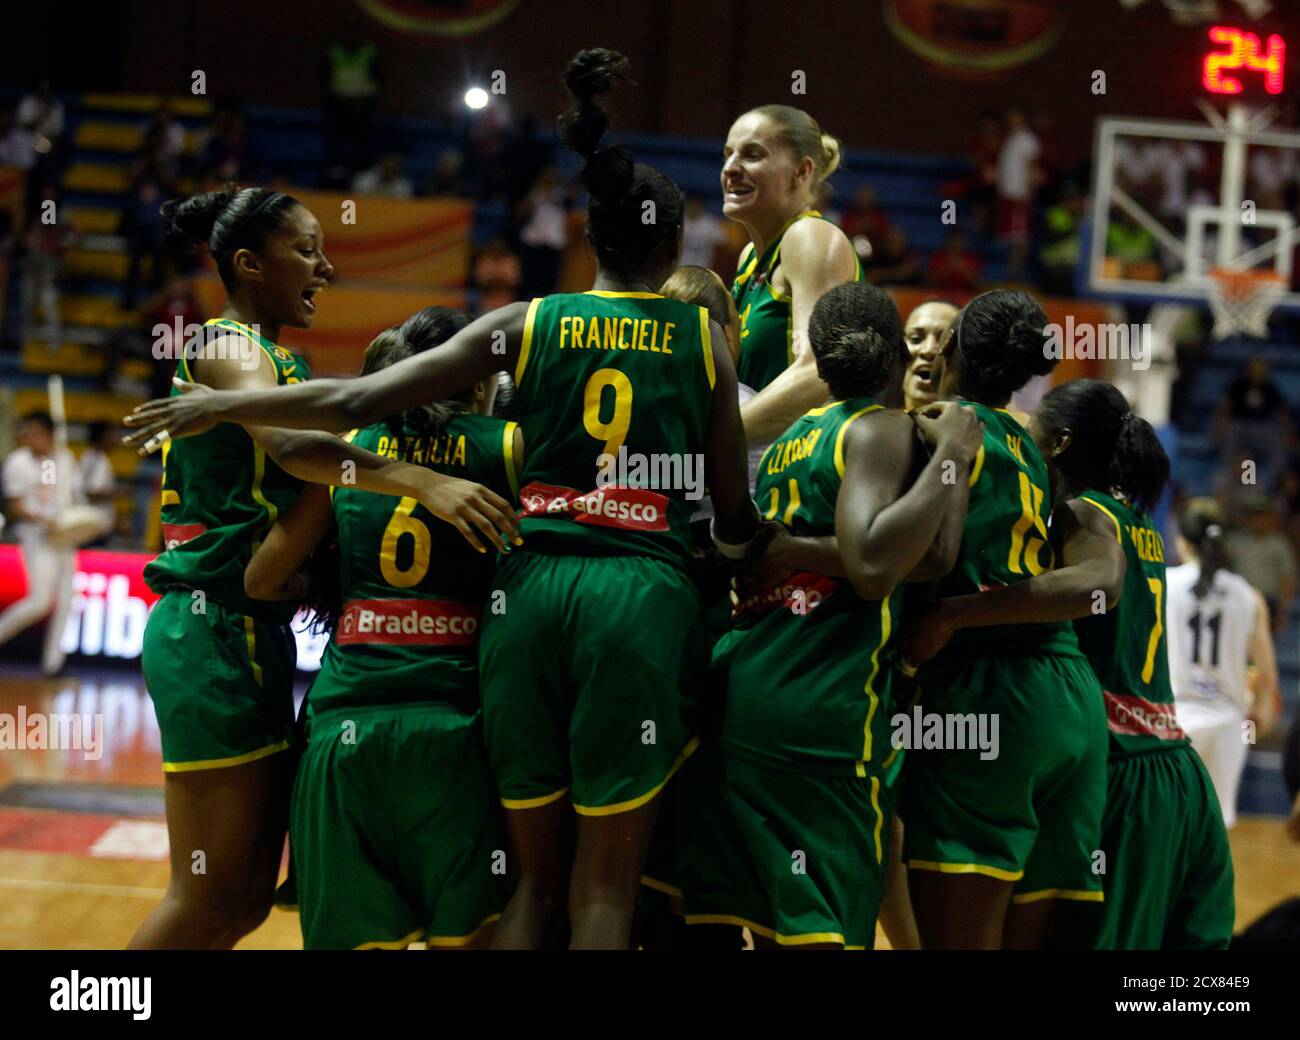 Brazil's team celebrates after defeating Argentina in the final round of the FIBA Americas Championship for Women in Neiva October 1, 2011. REUTERS/John Vizcaino (COLOMBIA - Tags: SPORT BASKETBALL) Stock Photo